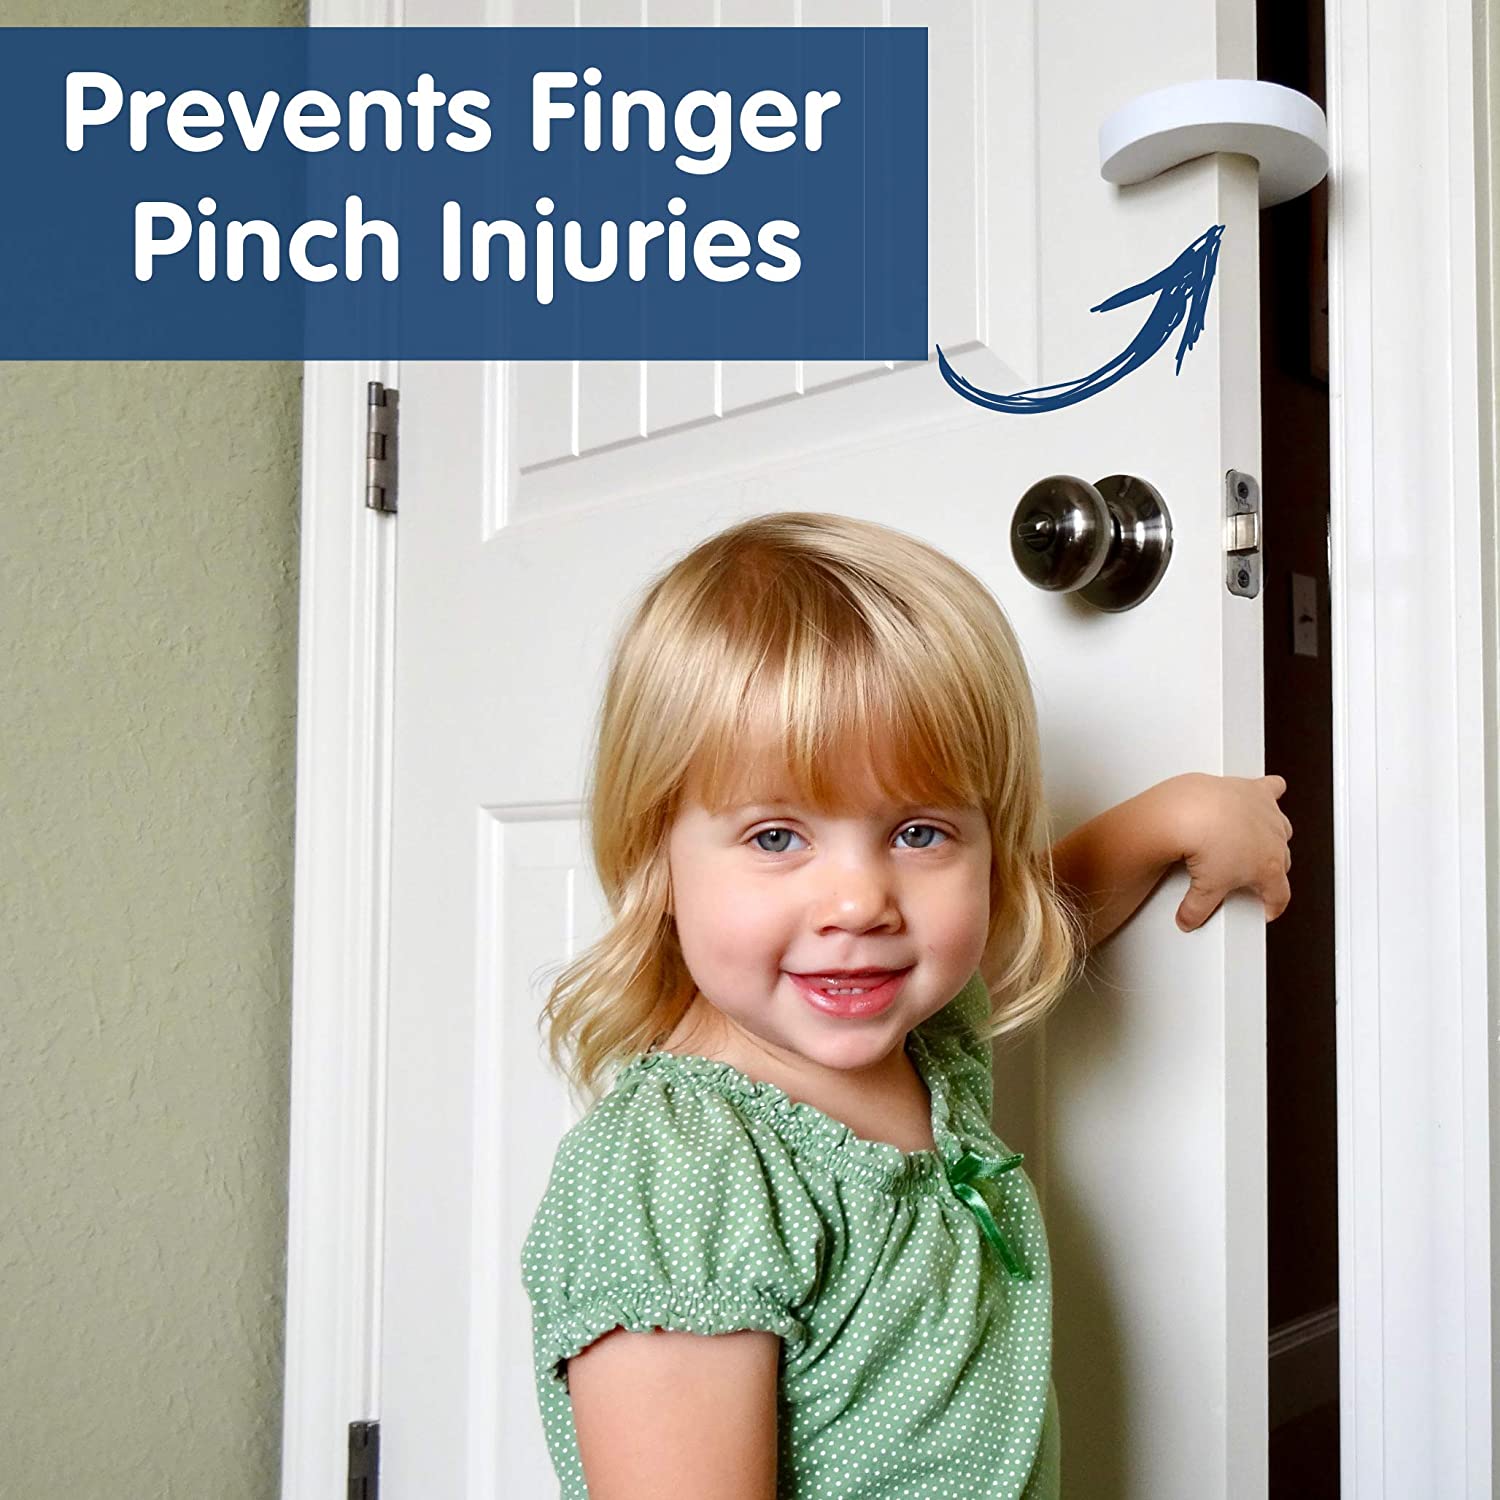 Hot Pinch Guard 4pk. Baby Proofing Doors Made Easy with Soft Yet Durable Foam Door Stopper. Prevents Finger Pinch Injuries